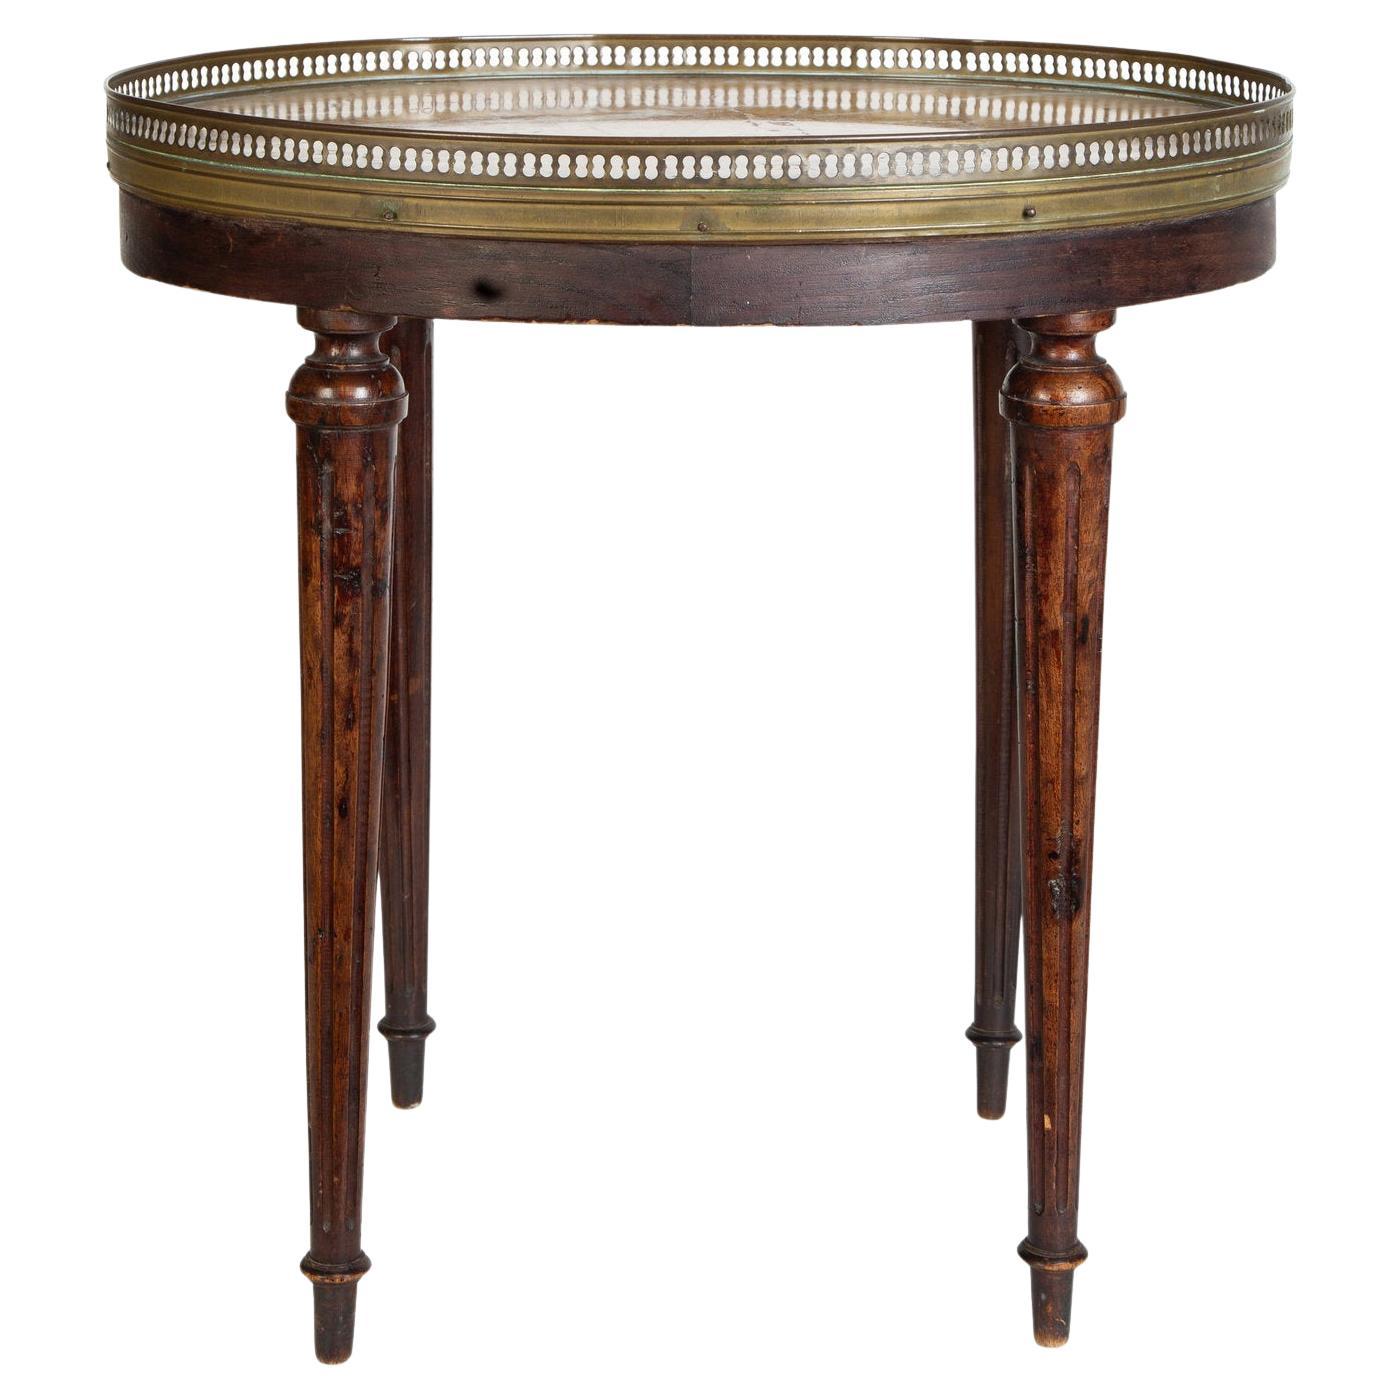 Round Marble Top Side Table with a Gallery and Reeded Legs, Late 19th Century